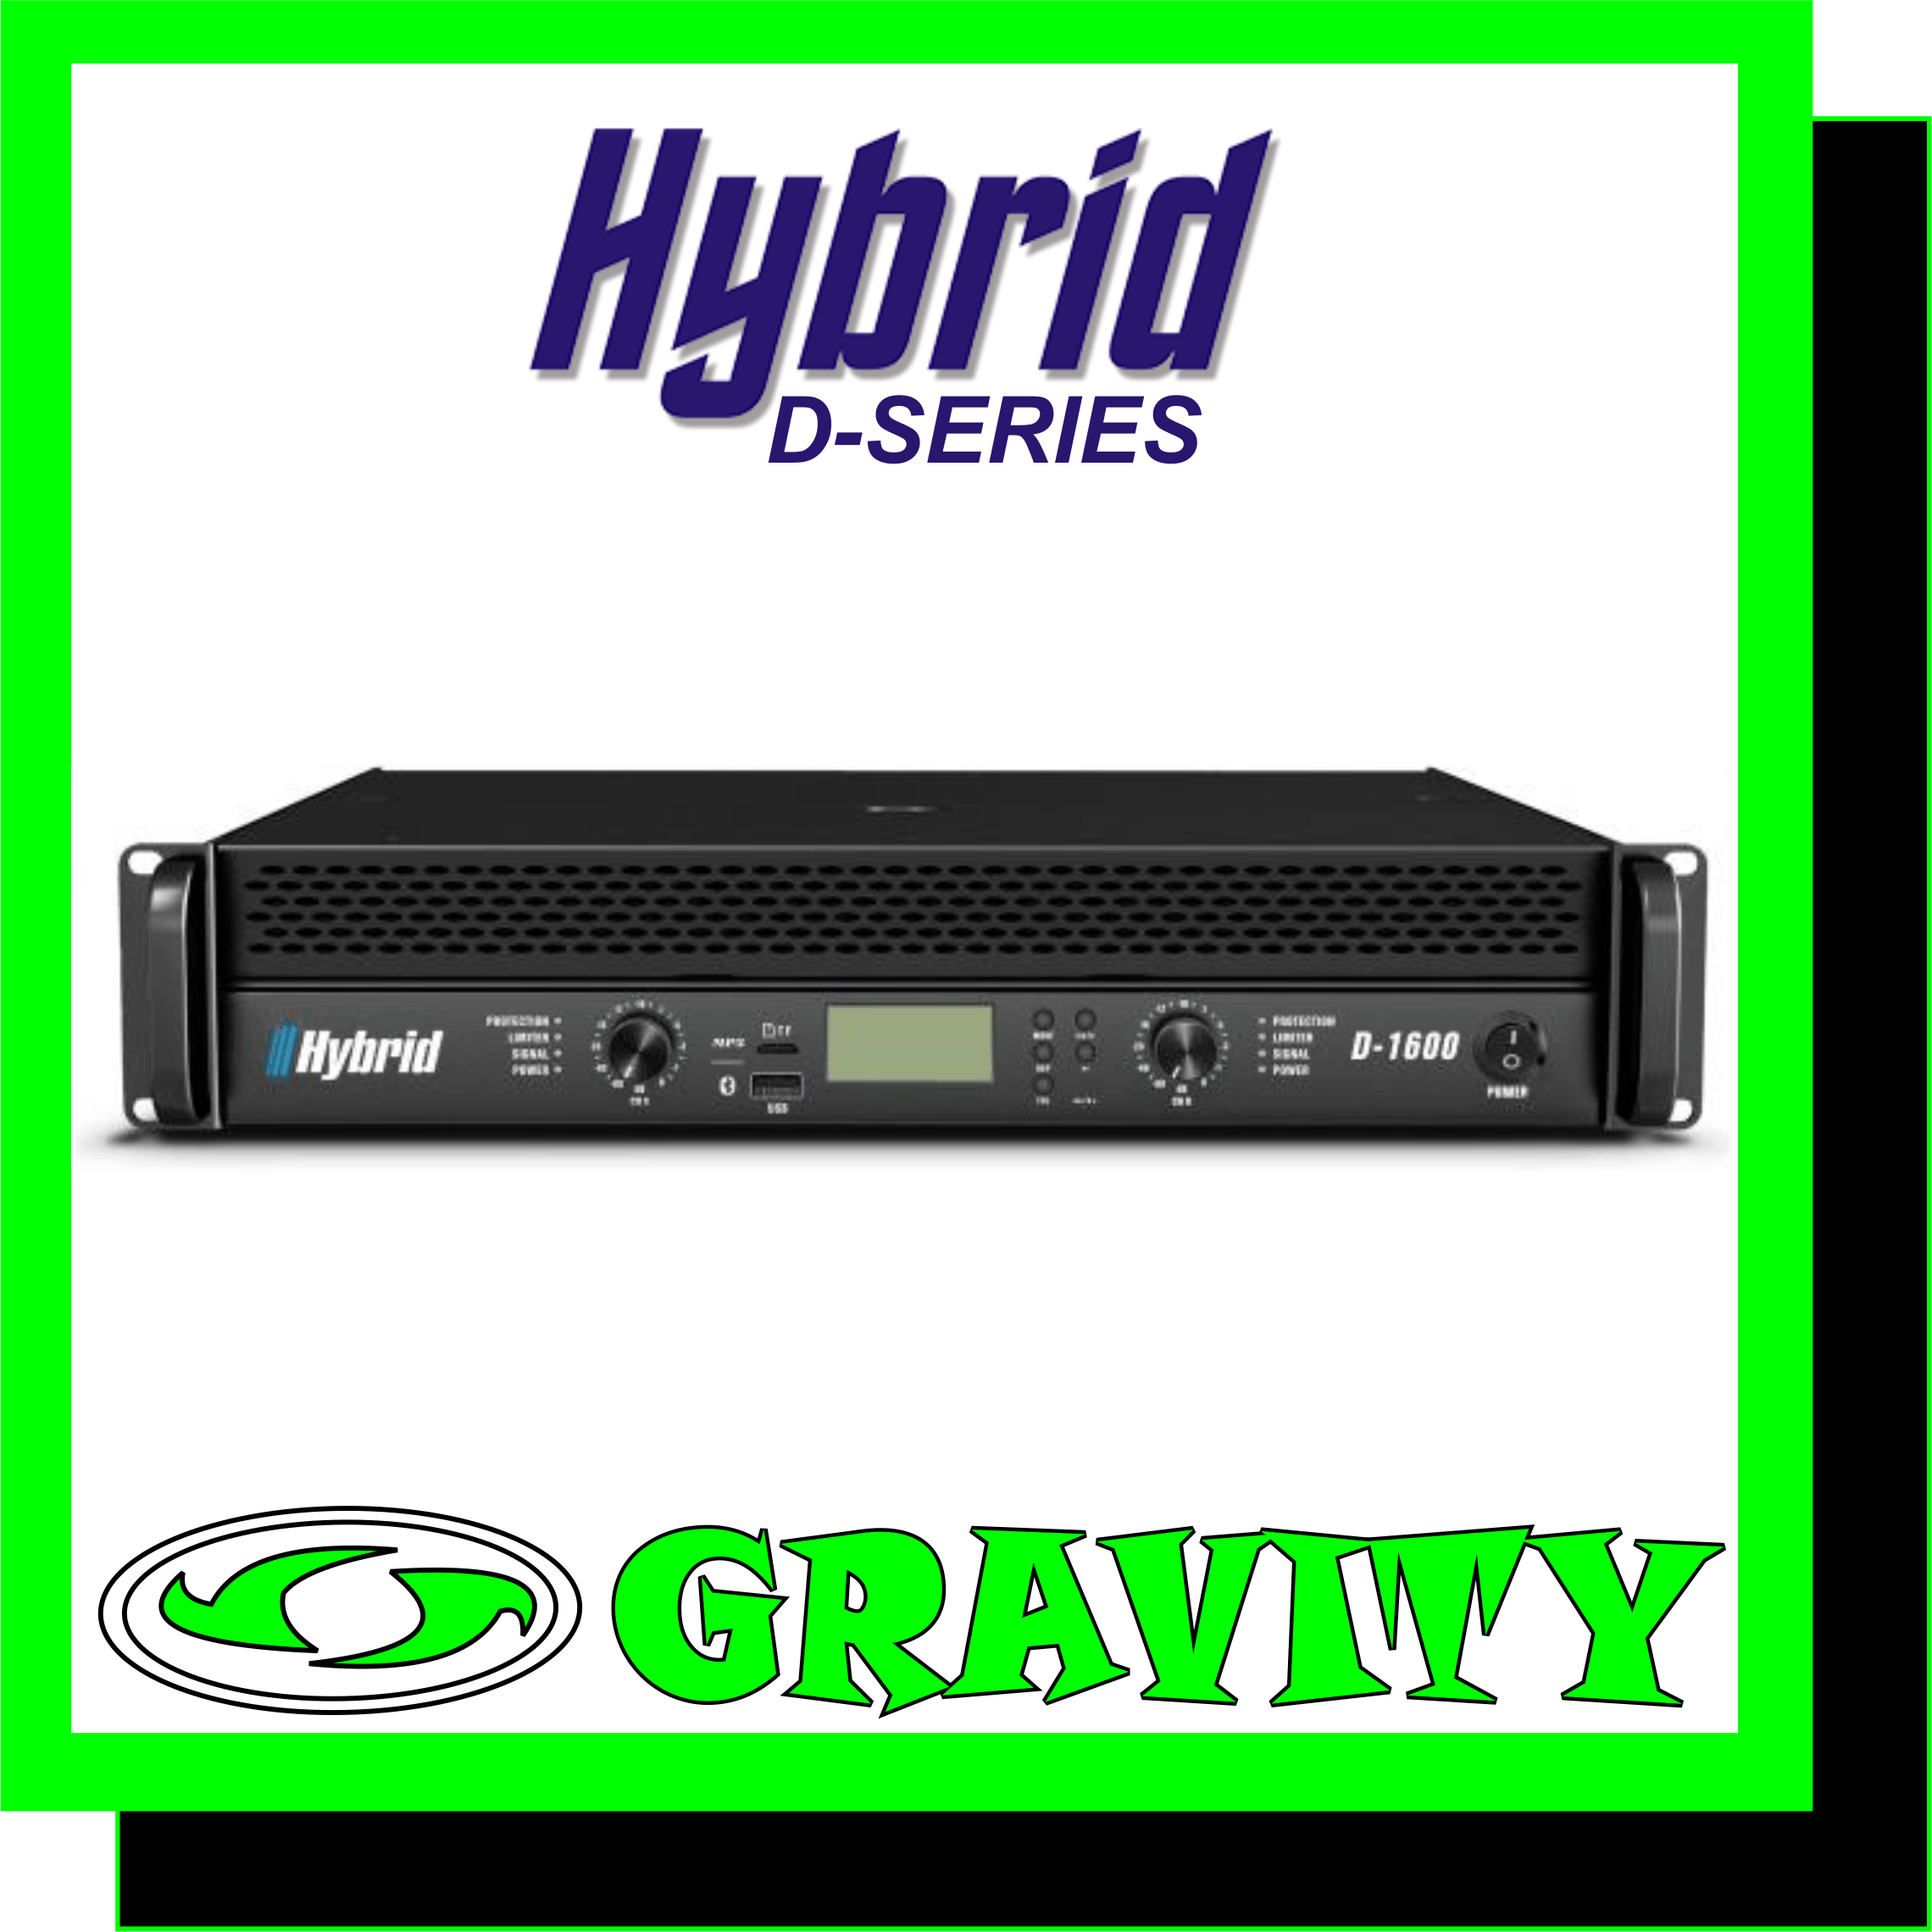 Hybrid D1600 2X800W with X-over - MP3 - Bluetooth  8Ohm Stereo Power . RMS/CH 485W 4Ohm Stereo Power . RMS/CH 715W 8Ohm Bridged Mono Power . RMS 1430W  Frequency Response ( 1W/8O) 20Hz 20KHz +/- 3dB Protection DC Protection . Short Circuit Protection . Thermal Protection . Inrush Current Protection . Soft Start Portection . Input & Overload Protection THD+N (20Hz-20KHz) <0.1% Damping Factor (1KHz @ 8O) >300 Hum & Noise(A weighted . -80dBW) 95dB Input Impedance (Balanced / Unbalanced) 20K Ohm / 10K Ohm Crosstalk (20Hz-20KHz Rated Power 8O) >60dB Cooling 2 x Fans . Dual speed . Front to Rear Airflow  Input Connectors Jack/Female XLR Neutrik Combo + Male XLR Neutrik Output Connectors 3x Neutrik Speakon Dimensions (WxHxD) mm 483 x 88 x 430 Weight Kg 18.5